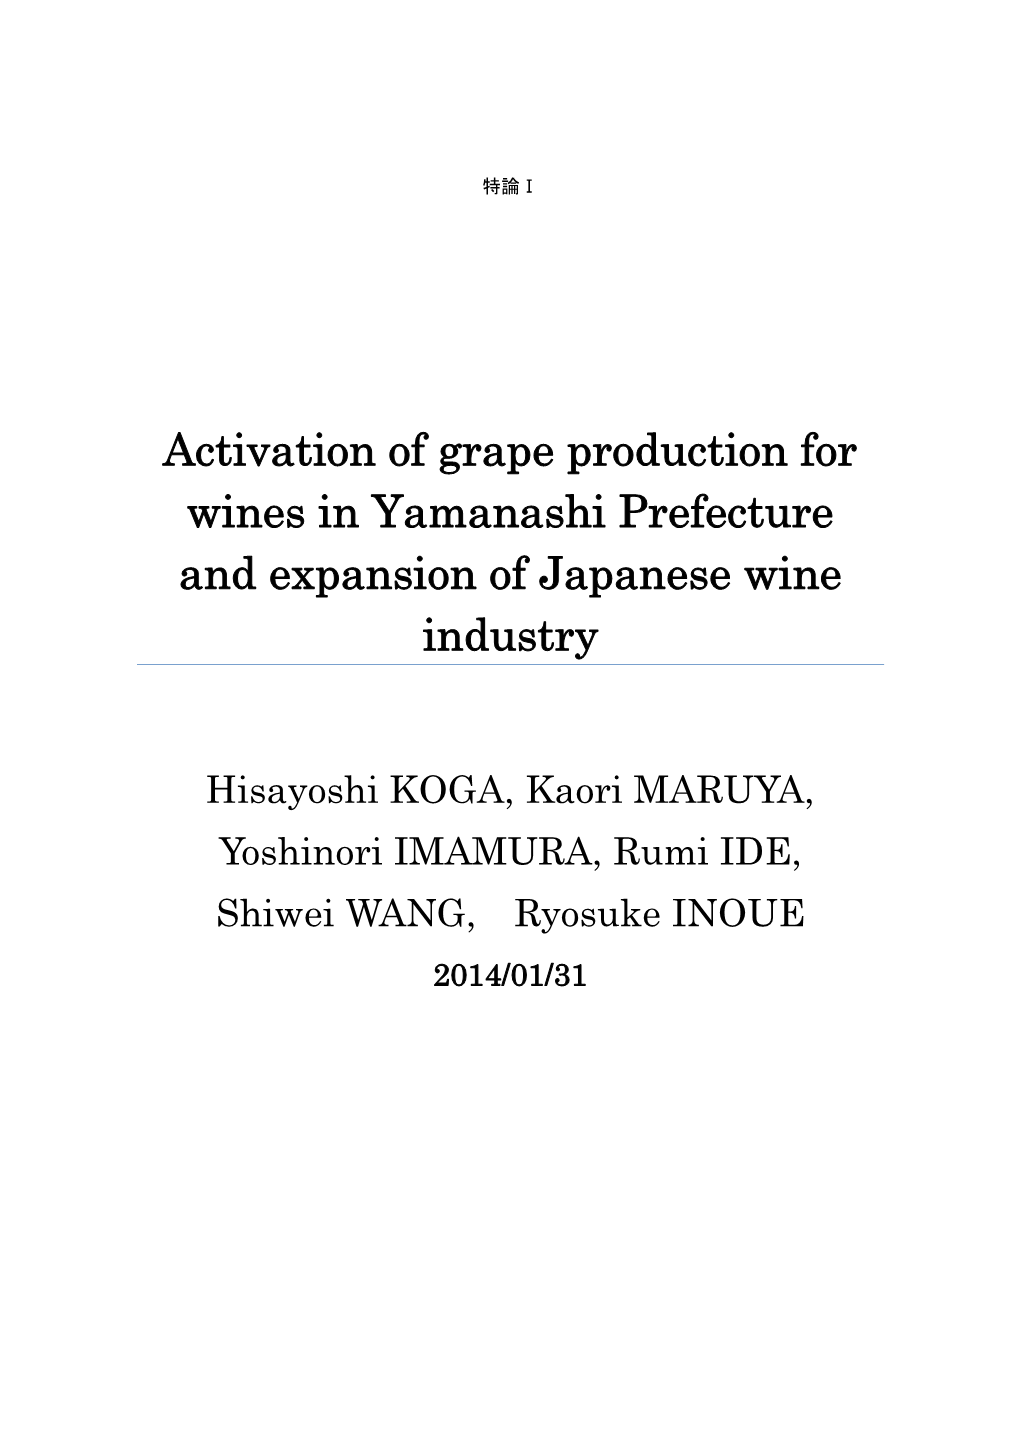 Activation of Grape Production for Wines in Yamanashi Prefecture and Expansion of Japanese Wine Industry